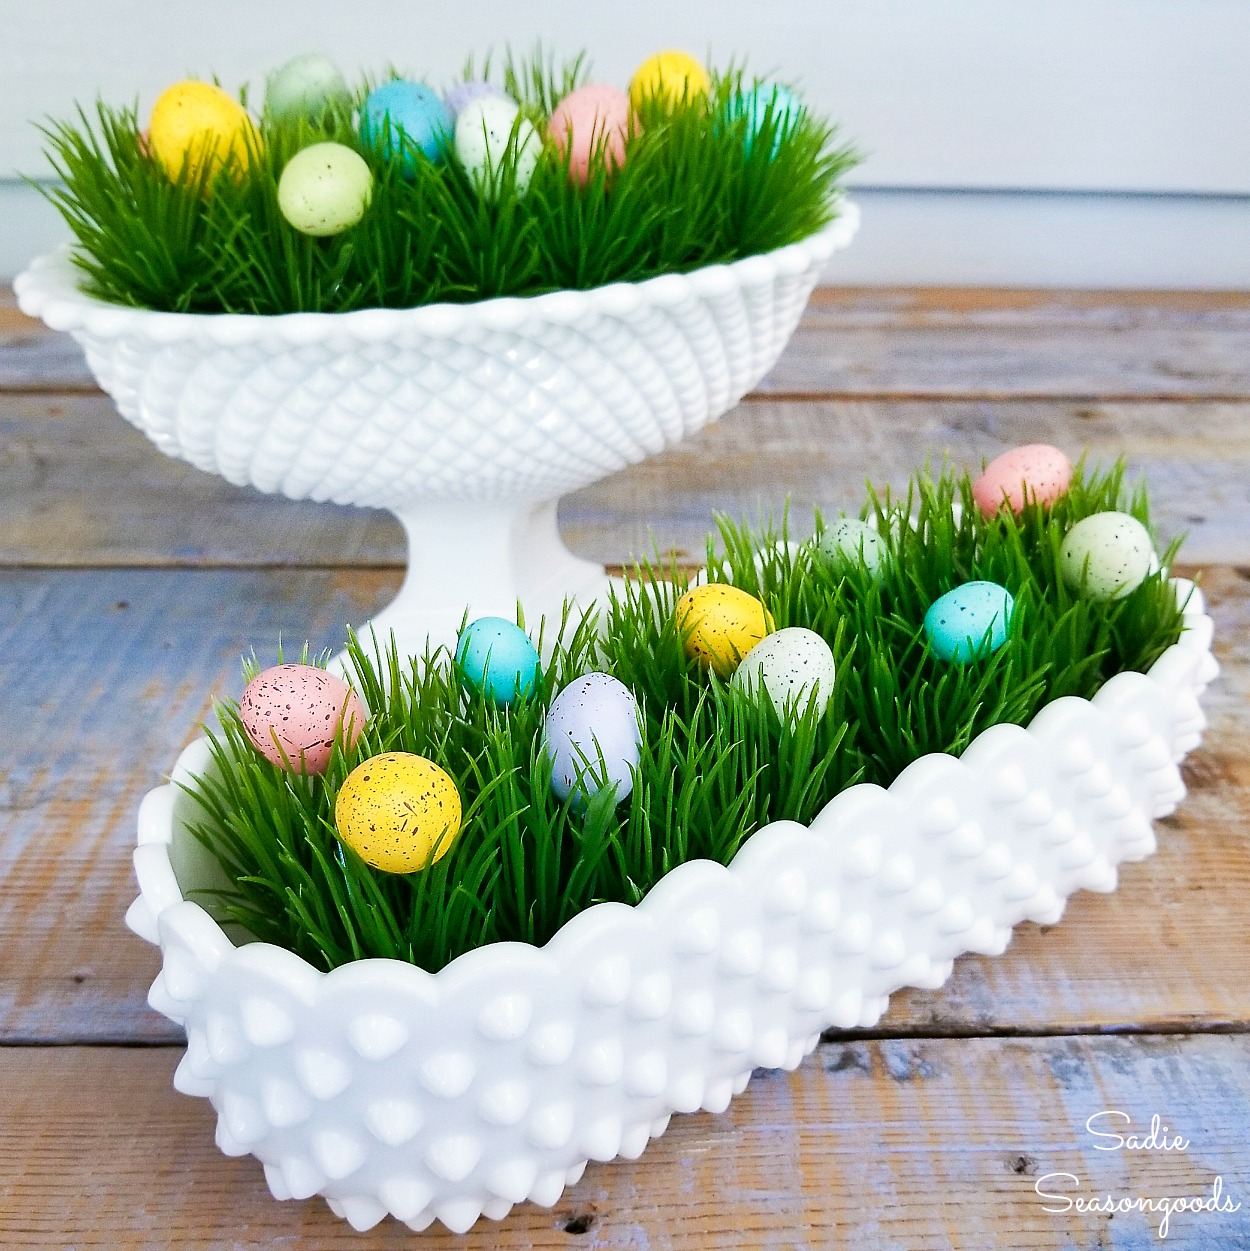 Hobnail milk glass as vintage Easter decor with speckled eggs on plastic grass